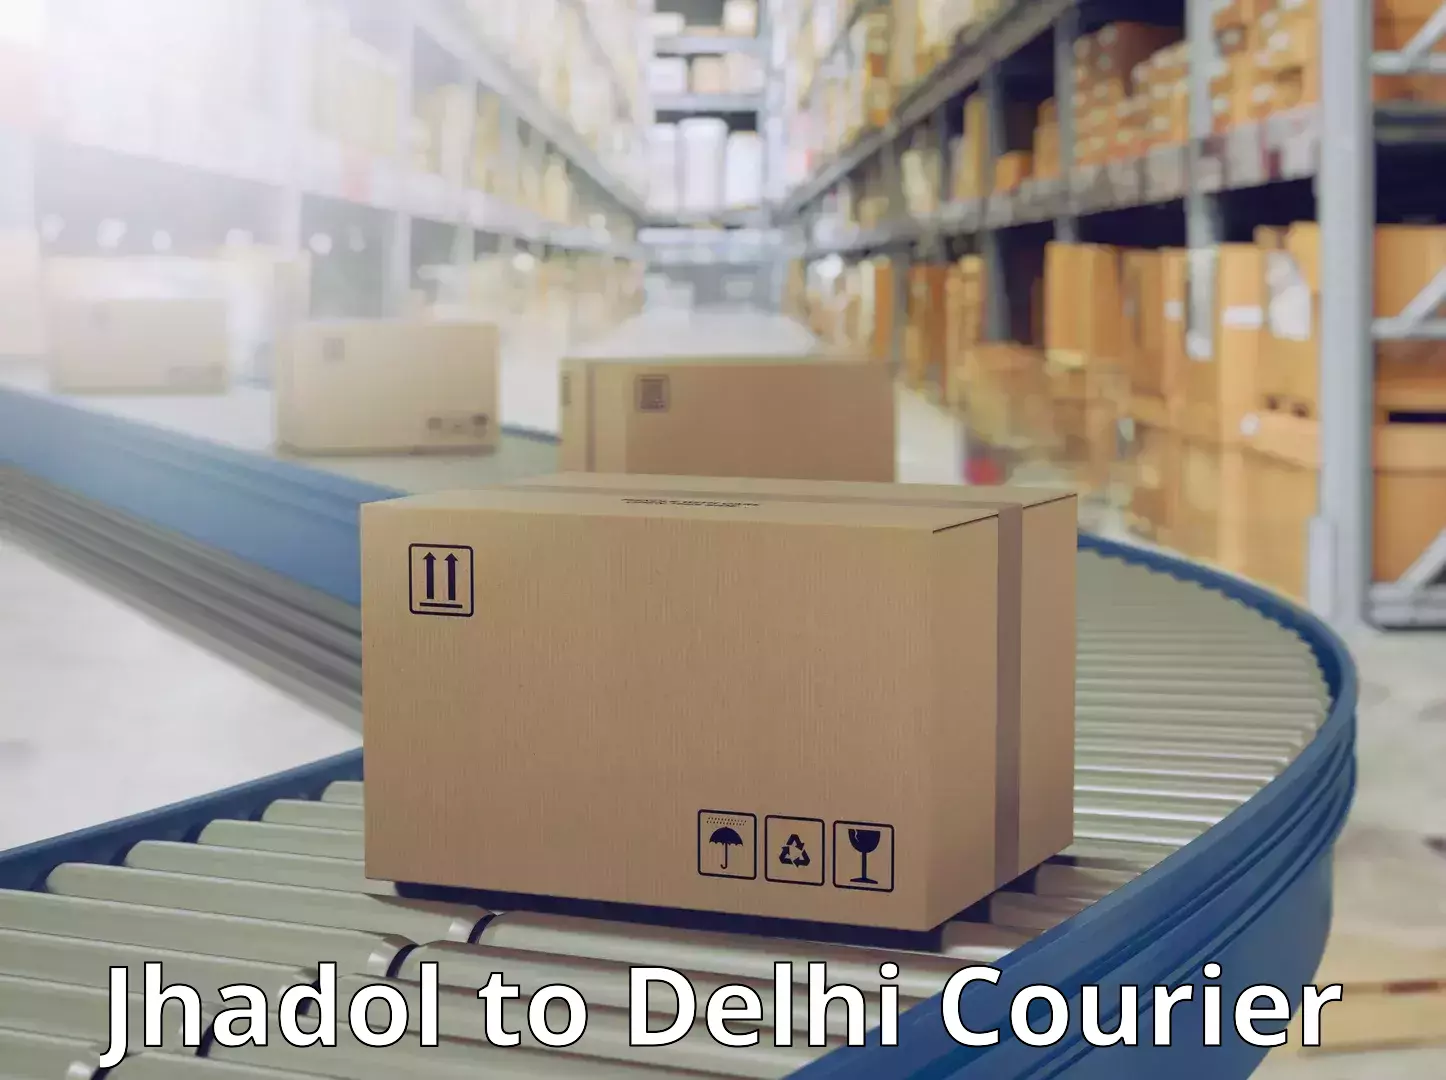 Tech-enabled shipping Jhadol to IIT Delhi